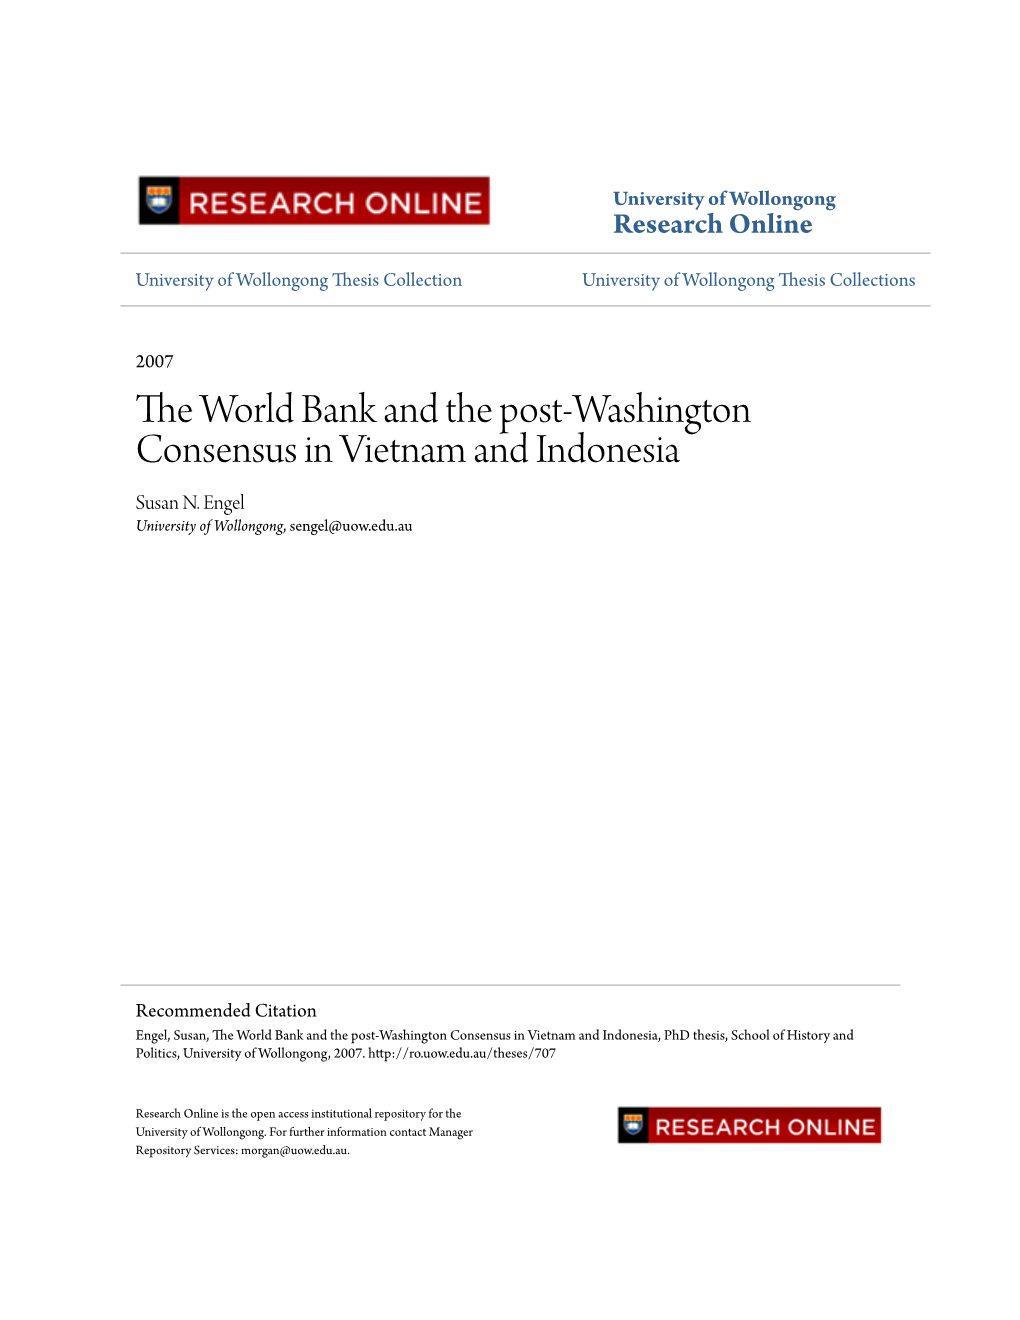 The World Bank and the Post-Washington Consensus in Vietnam and Indonesia